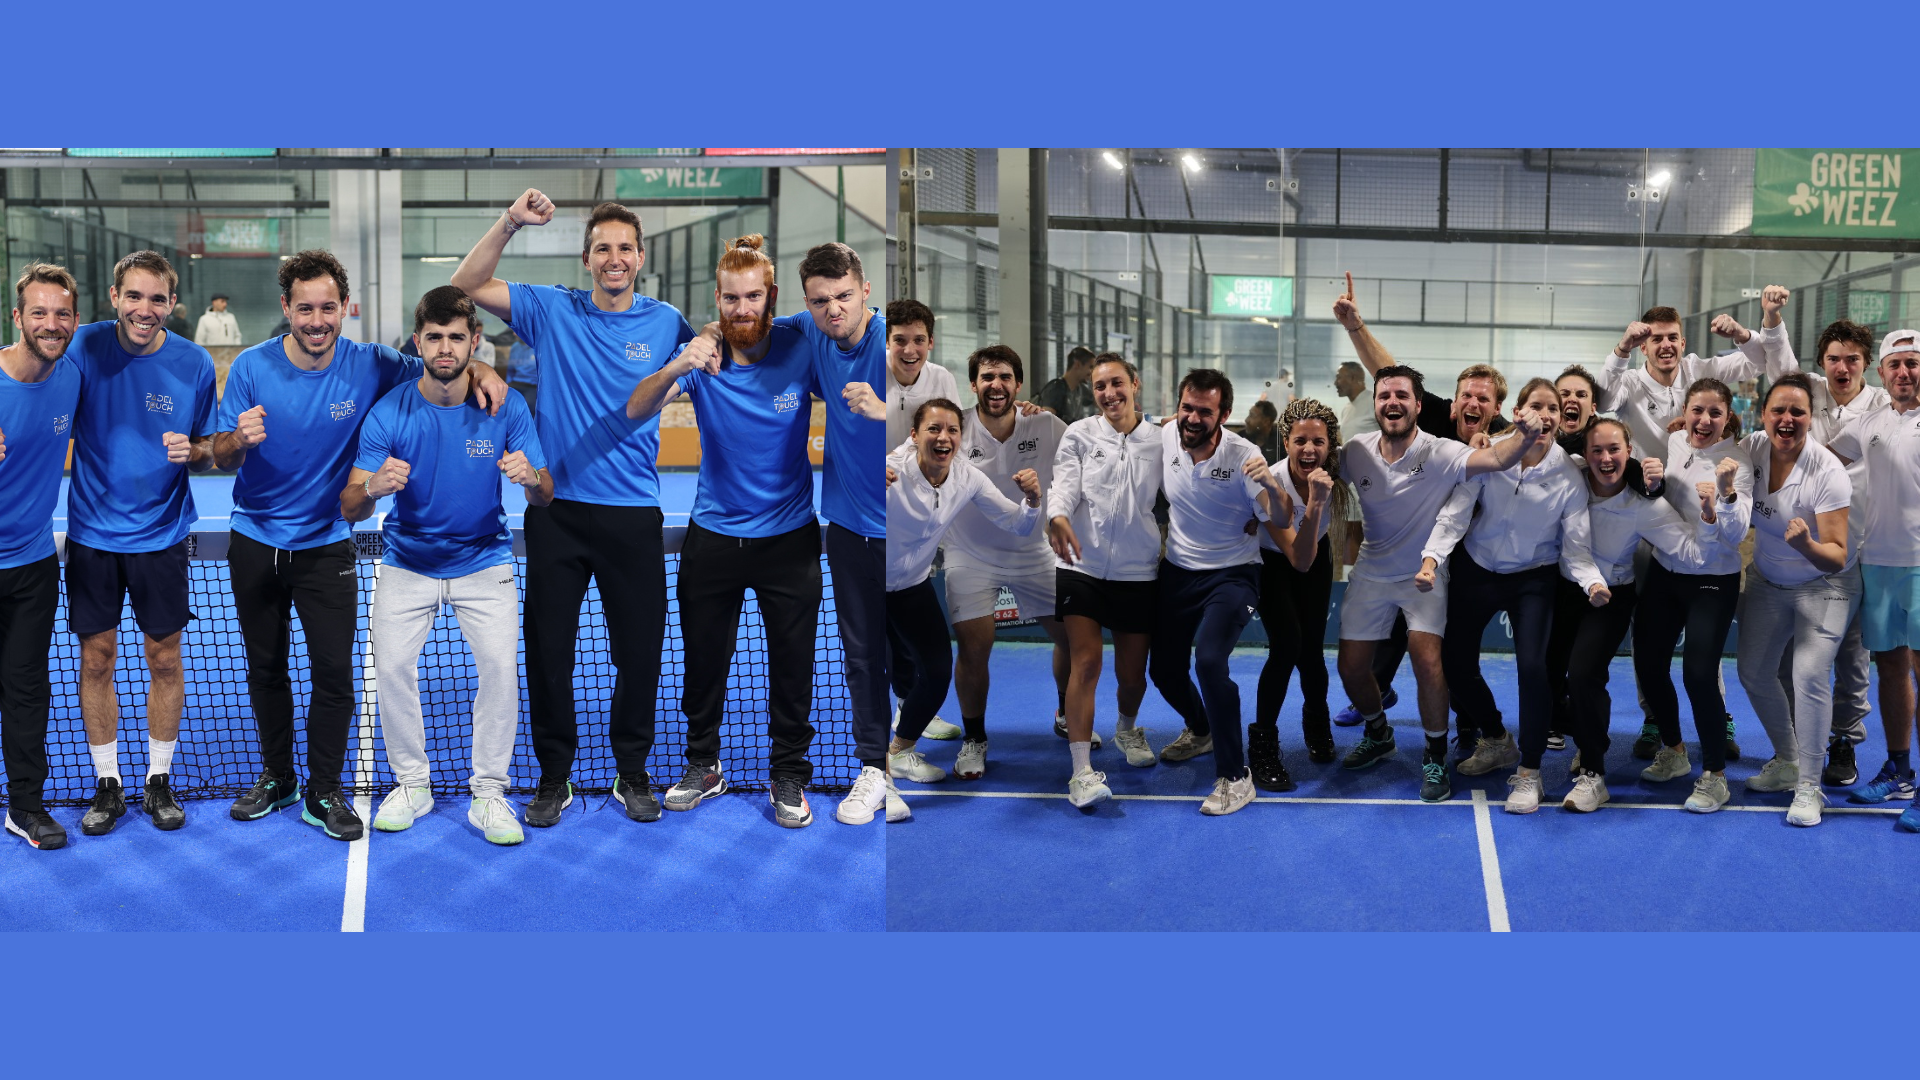 Interclubes N1 2023 – Padel Touch and All in 69 na final masculina